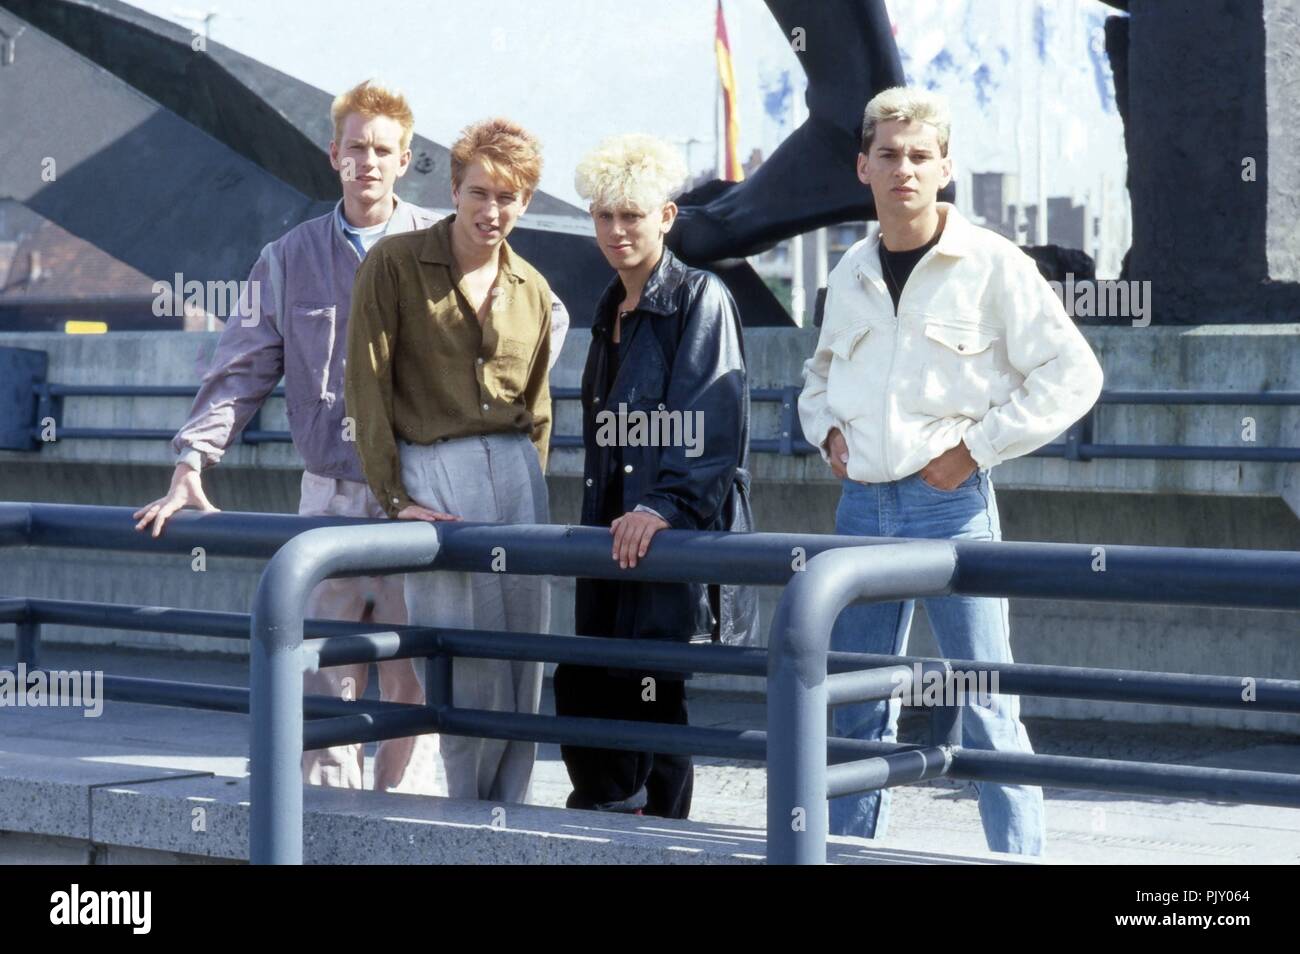 Depeche Mode" bei einem Promoshoot in Deutschland, 1983. "Depeche Mode"  posing for a promotional photo shooting in Germany, 1983. | usage worldwide  Stock Photo - Alamy